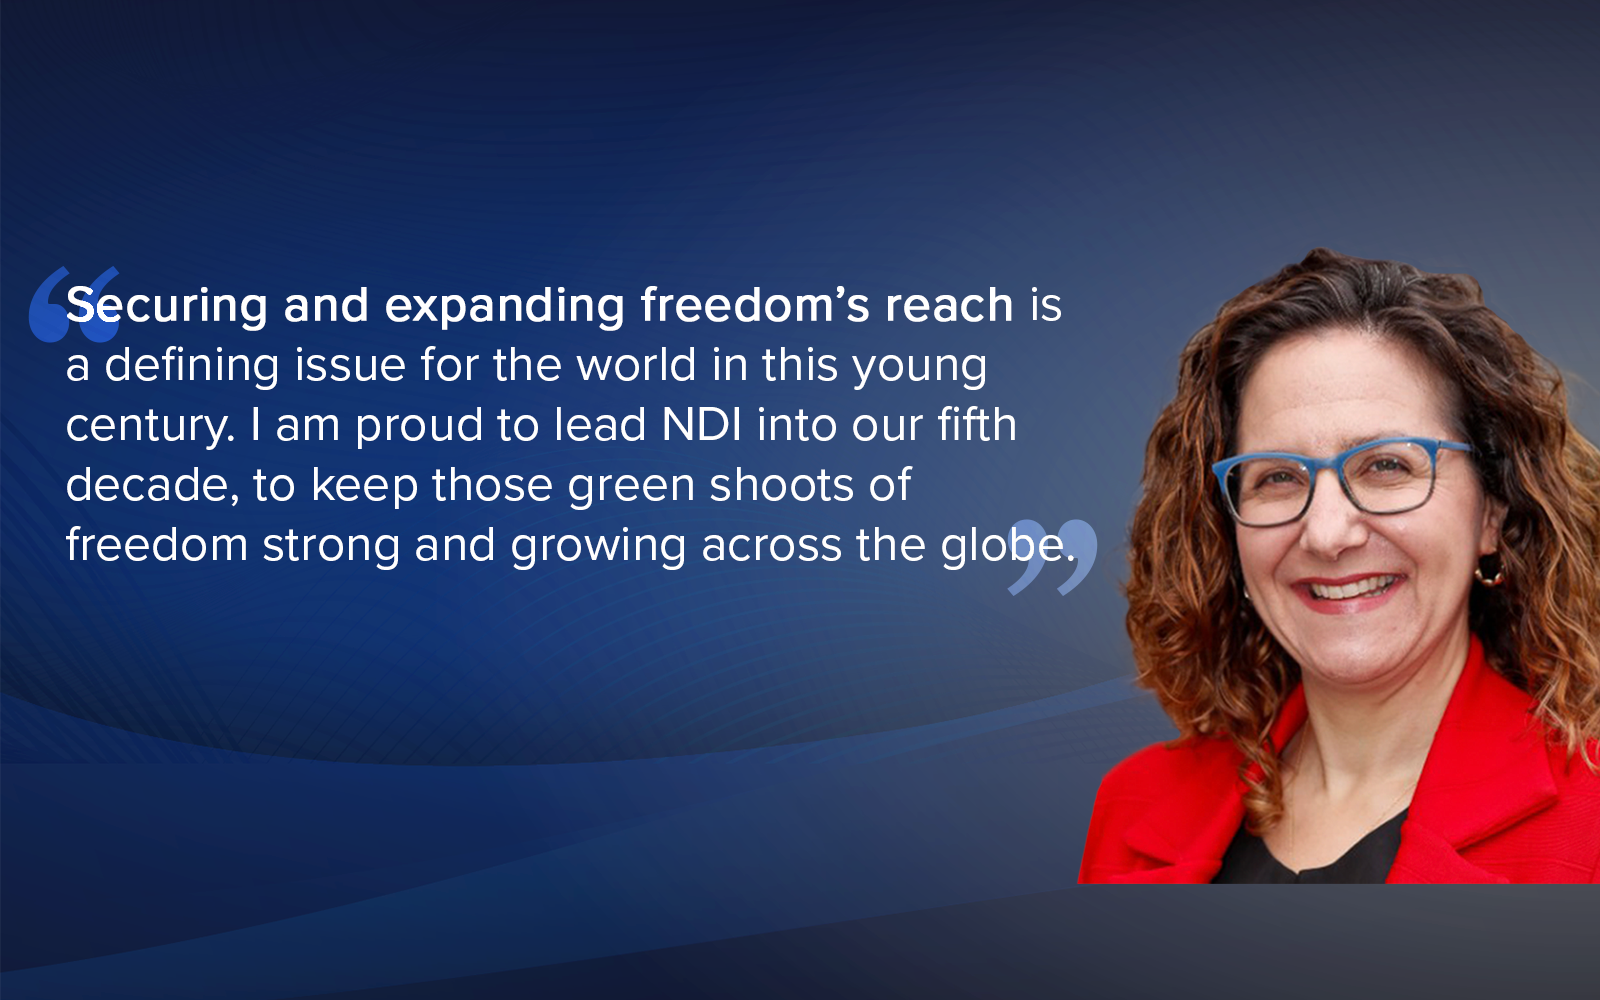 A Message from NDI's New President, Dr. Tamara Wittes